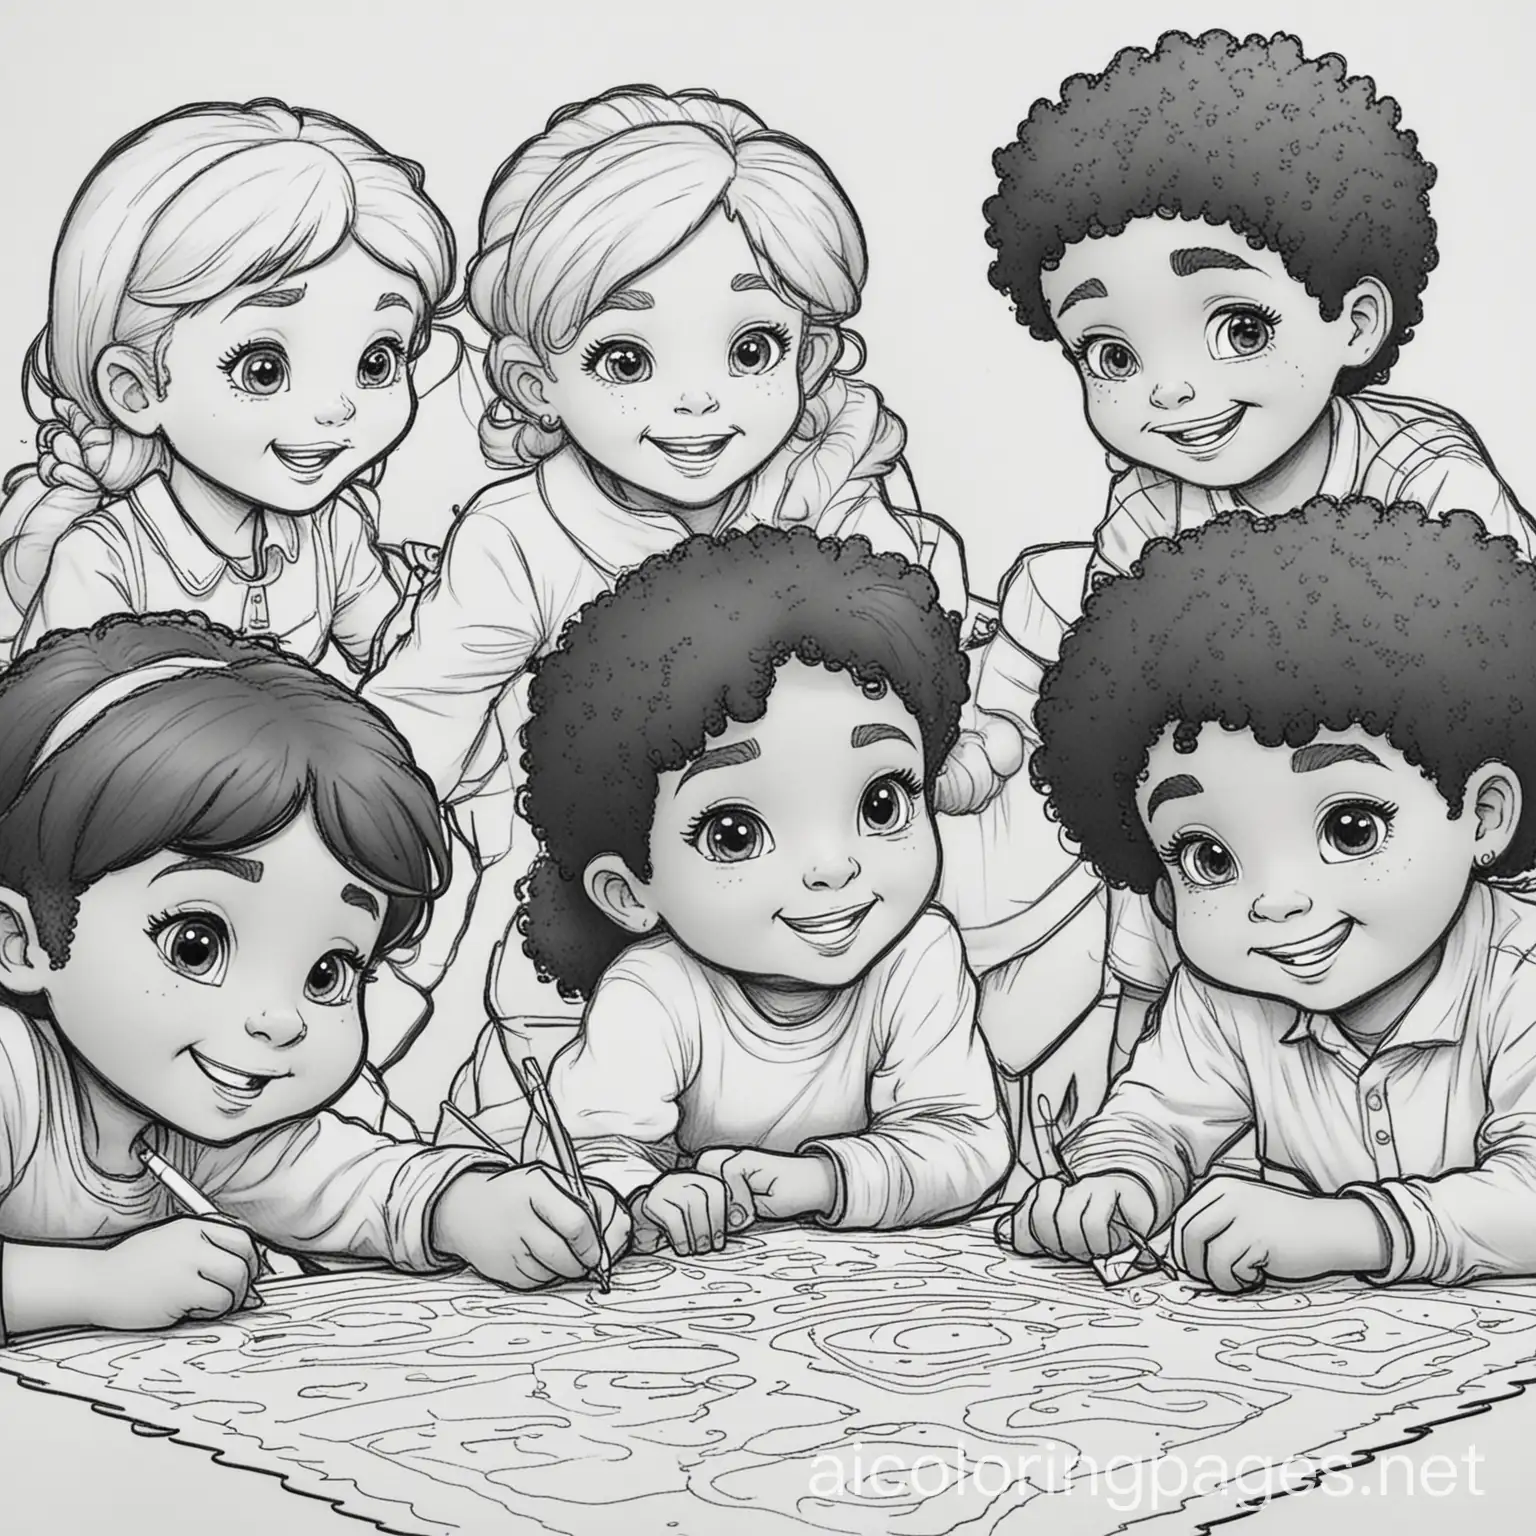 group of kids of all backgrounds and race playing , Coloring Page, black and white, line art, white background, Simplicity, Ample White Space. The background of the coloring page is plain white to make it easy for young children to color within the lines. The outlines of all the subjects are easy to distinguish, making it simple for kids to color without too much difficulty